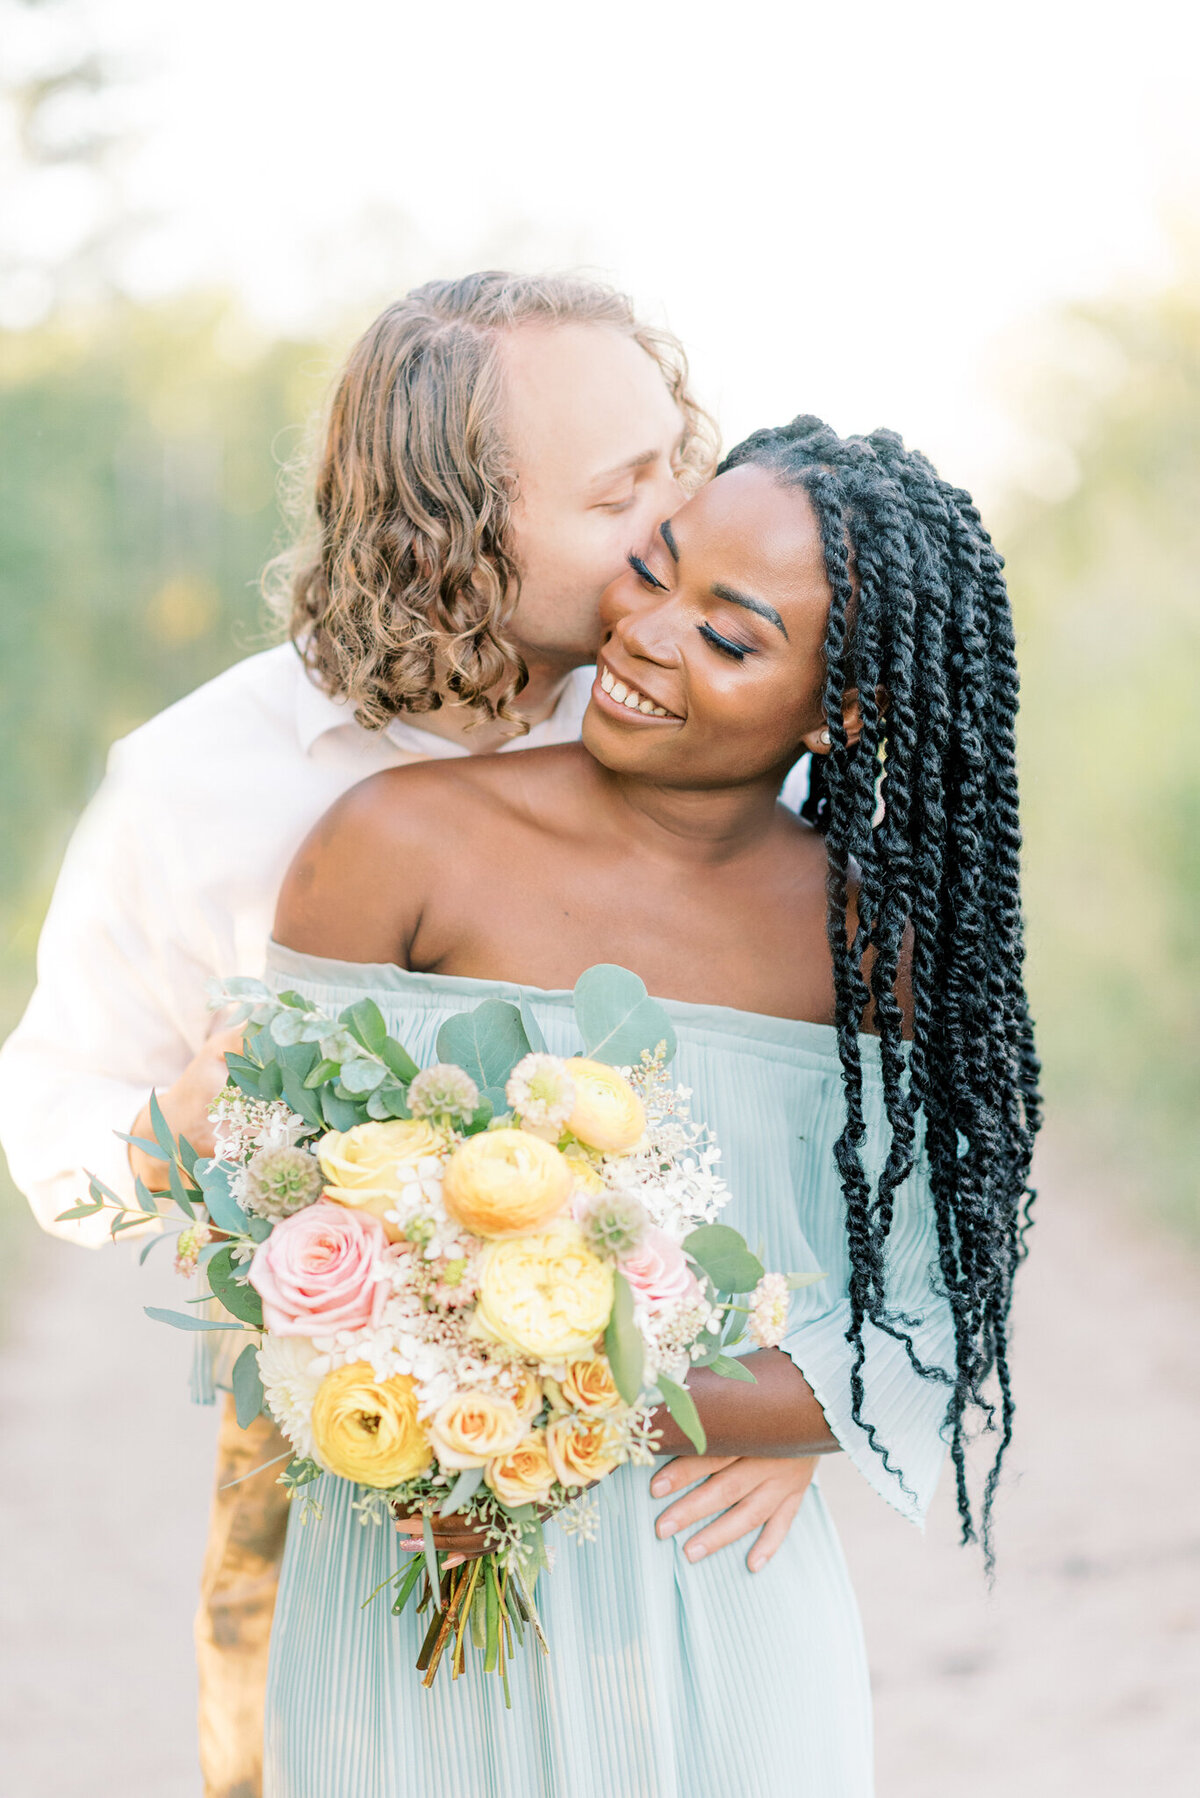 Classic, romantic interracial couple embracing, woman wearing a trendy pleated chiffon dress holding a stunning bouquet of pink and yellow spring flowers.